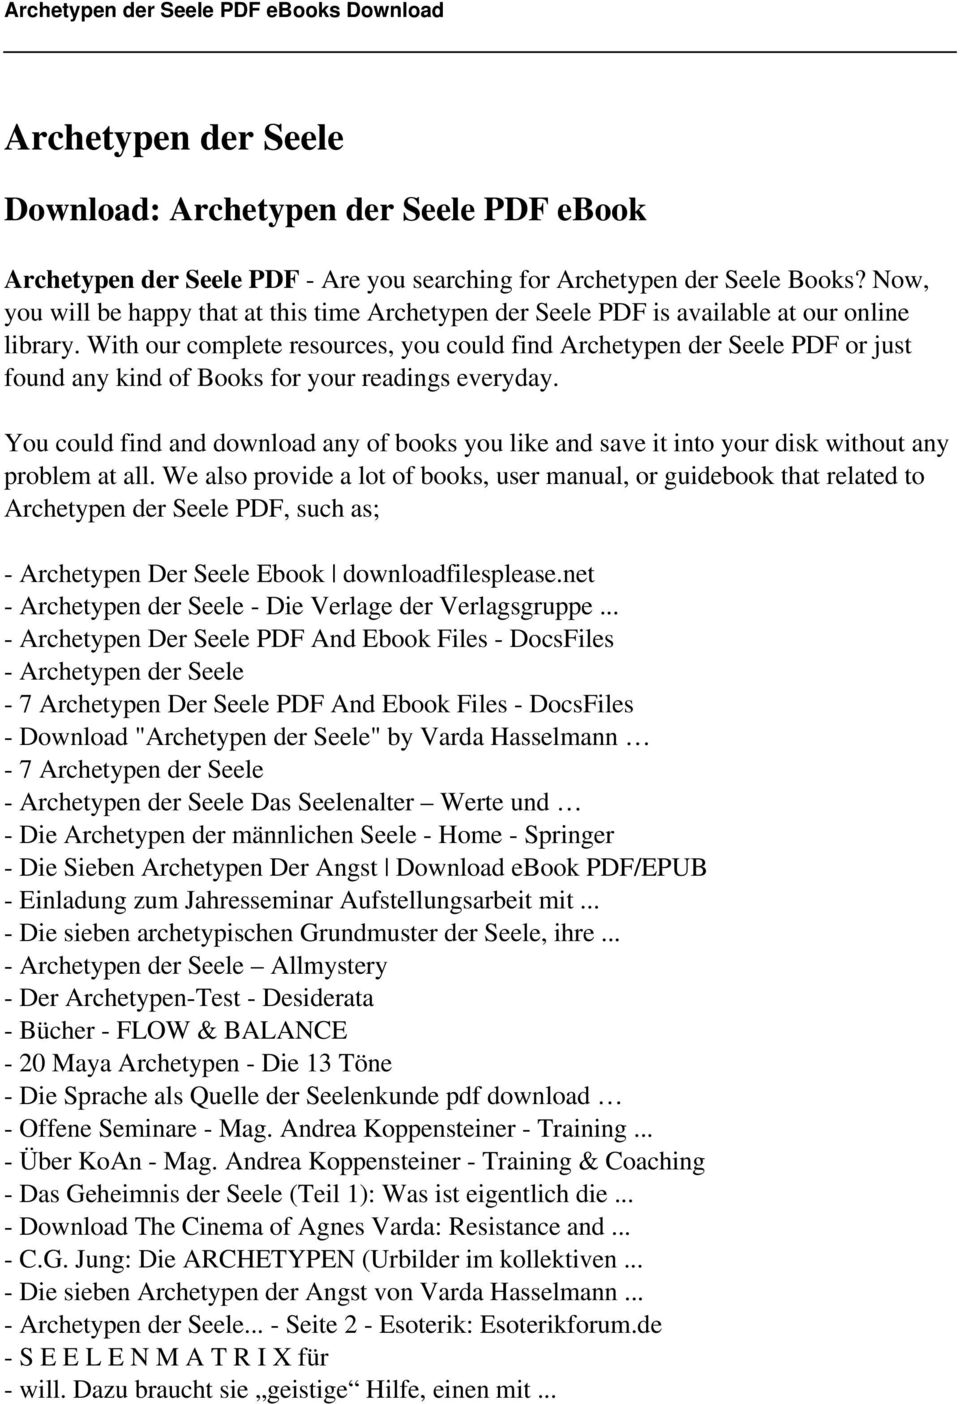 With our complete resources, you could find Archetypen der Seele PDF or just found any kind of Books for your readings everyday.